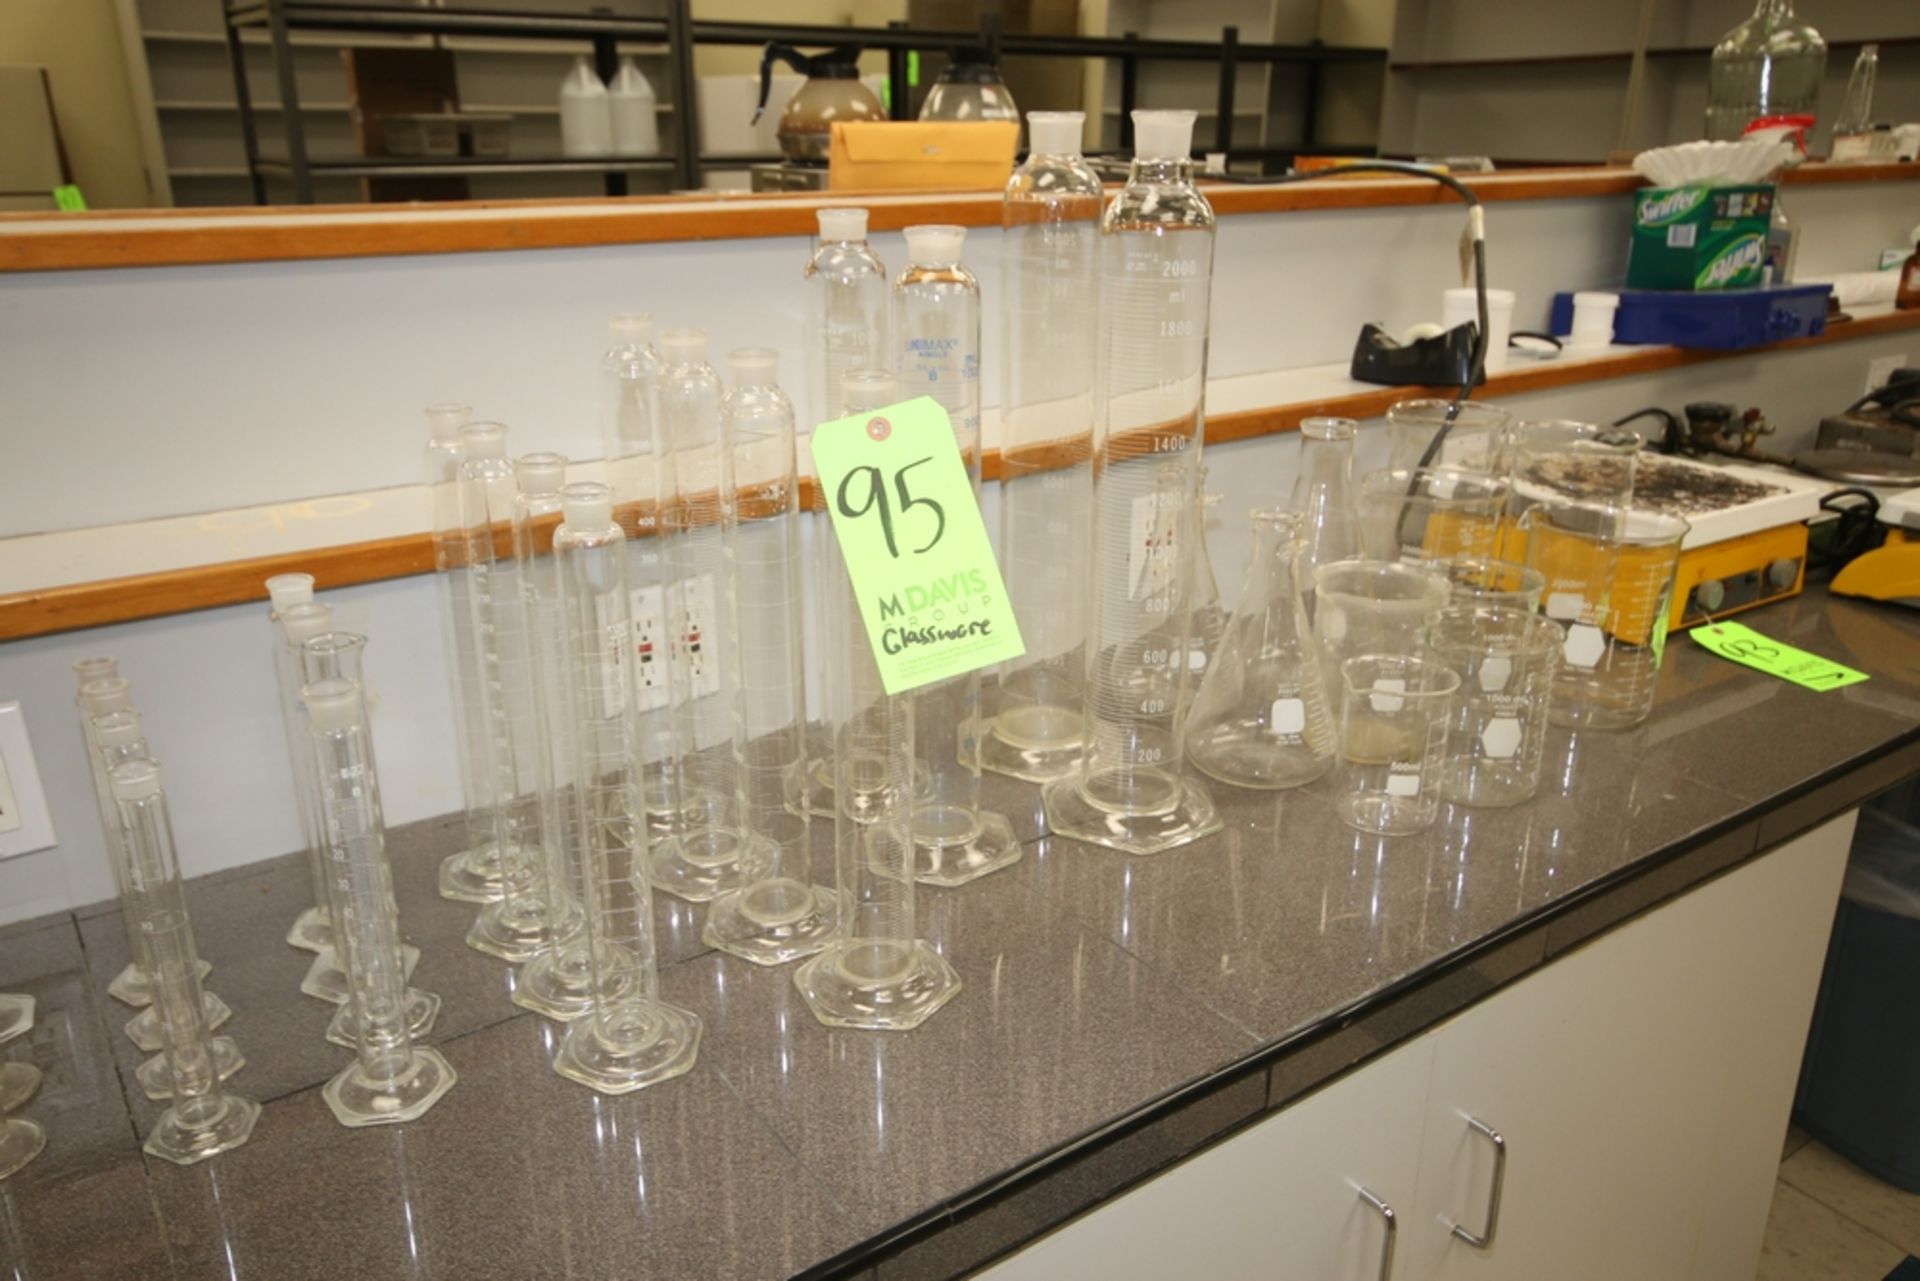 Assorted Lab Glassware, Aprox. 45 pcs, Includes Graduated Cylinders, Beakers, Beakers, and Other - Image 3 of 3